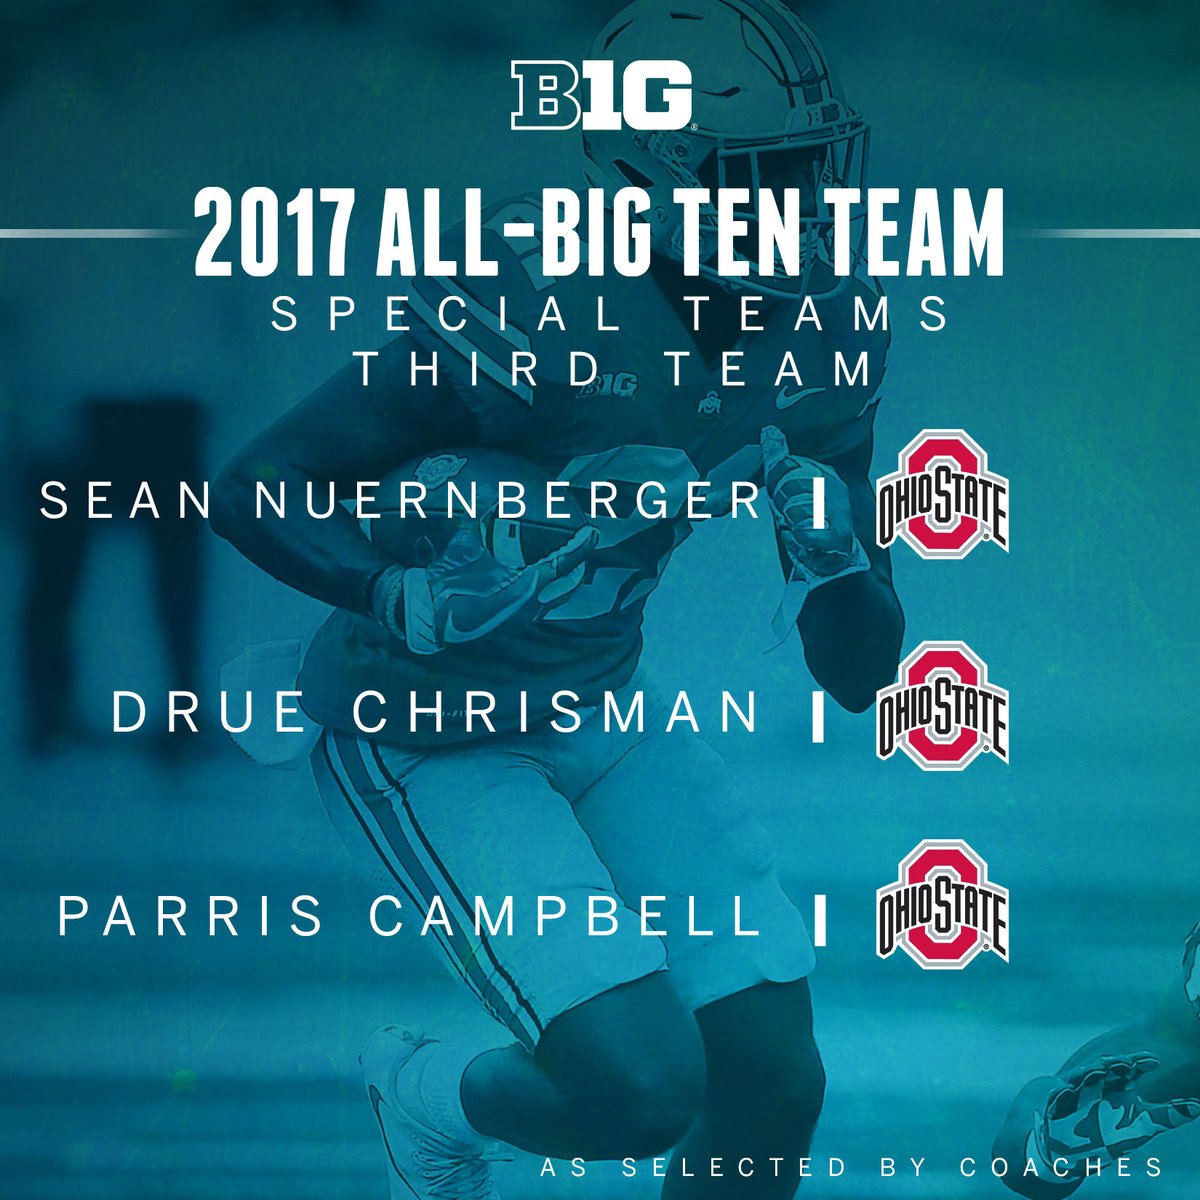 All-Big Ten Special Teams Third Team, as selected by coaches